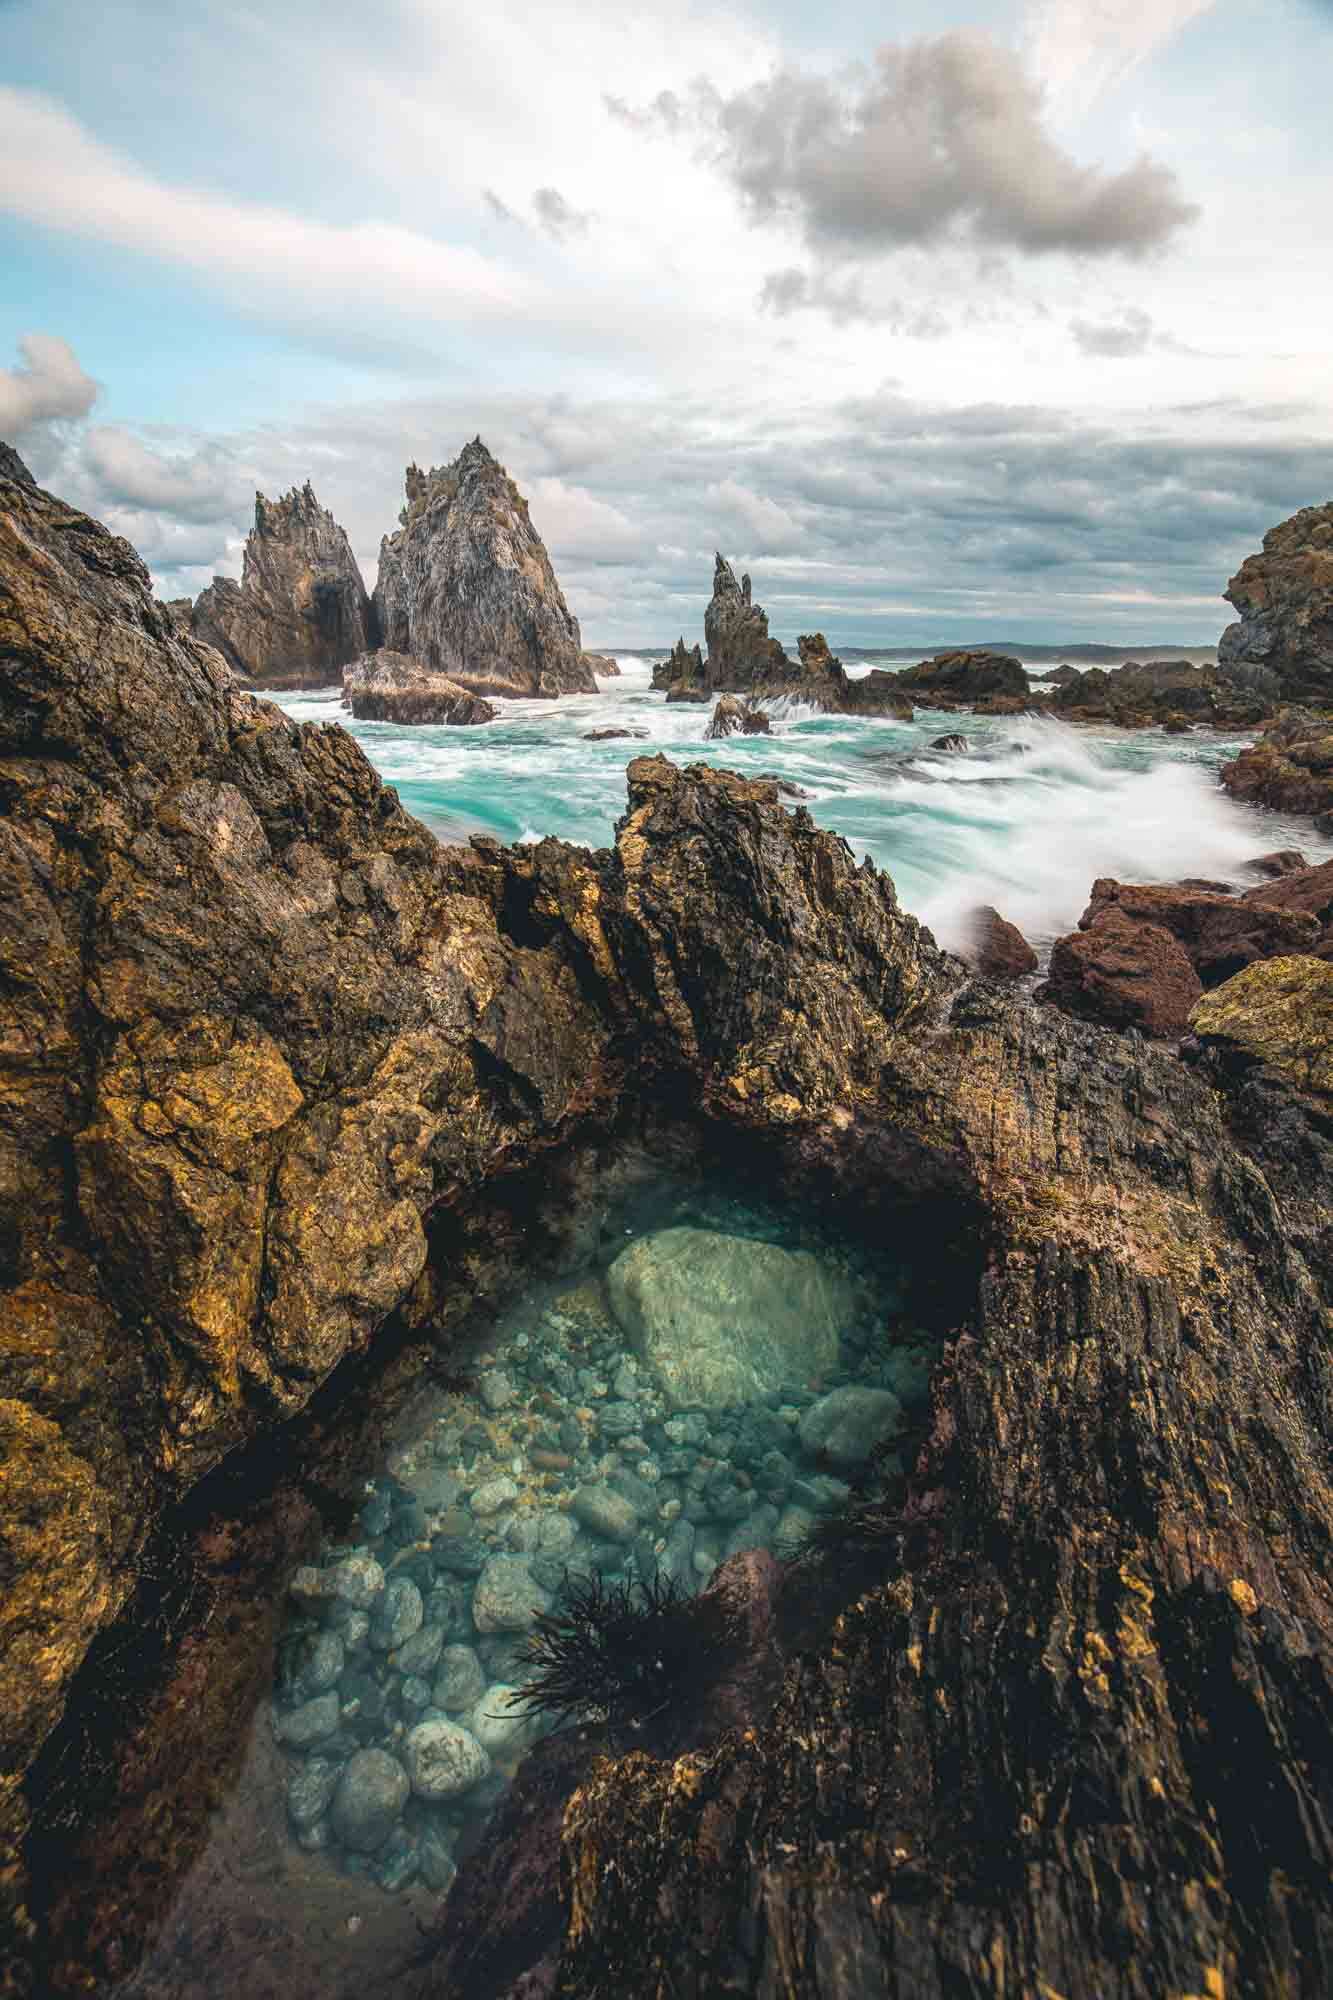 Rugged rock formations of Camel Rock in Bermagui with a natural tide pool in the foreground and turbulent sea in the background under a cloudy sky.